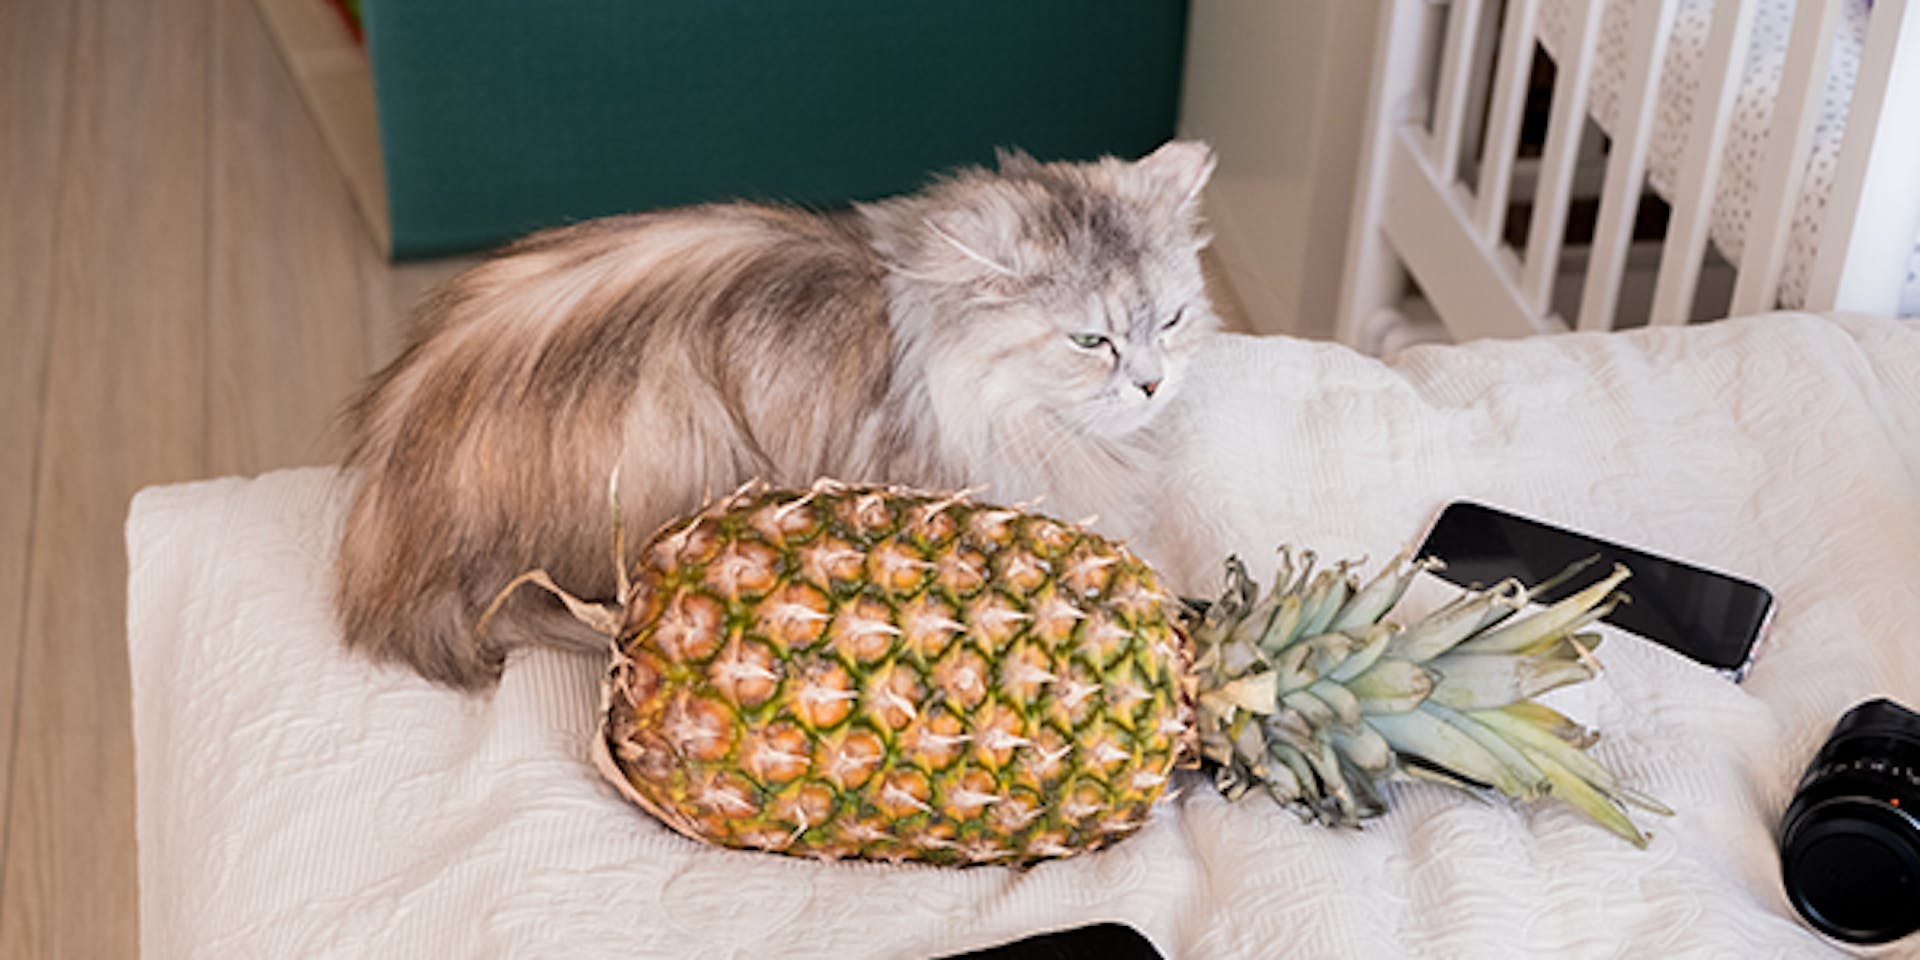 A cat sitting on a table next to a pineapple 